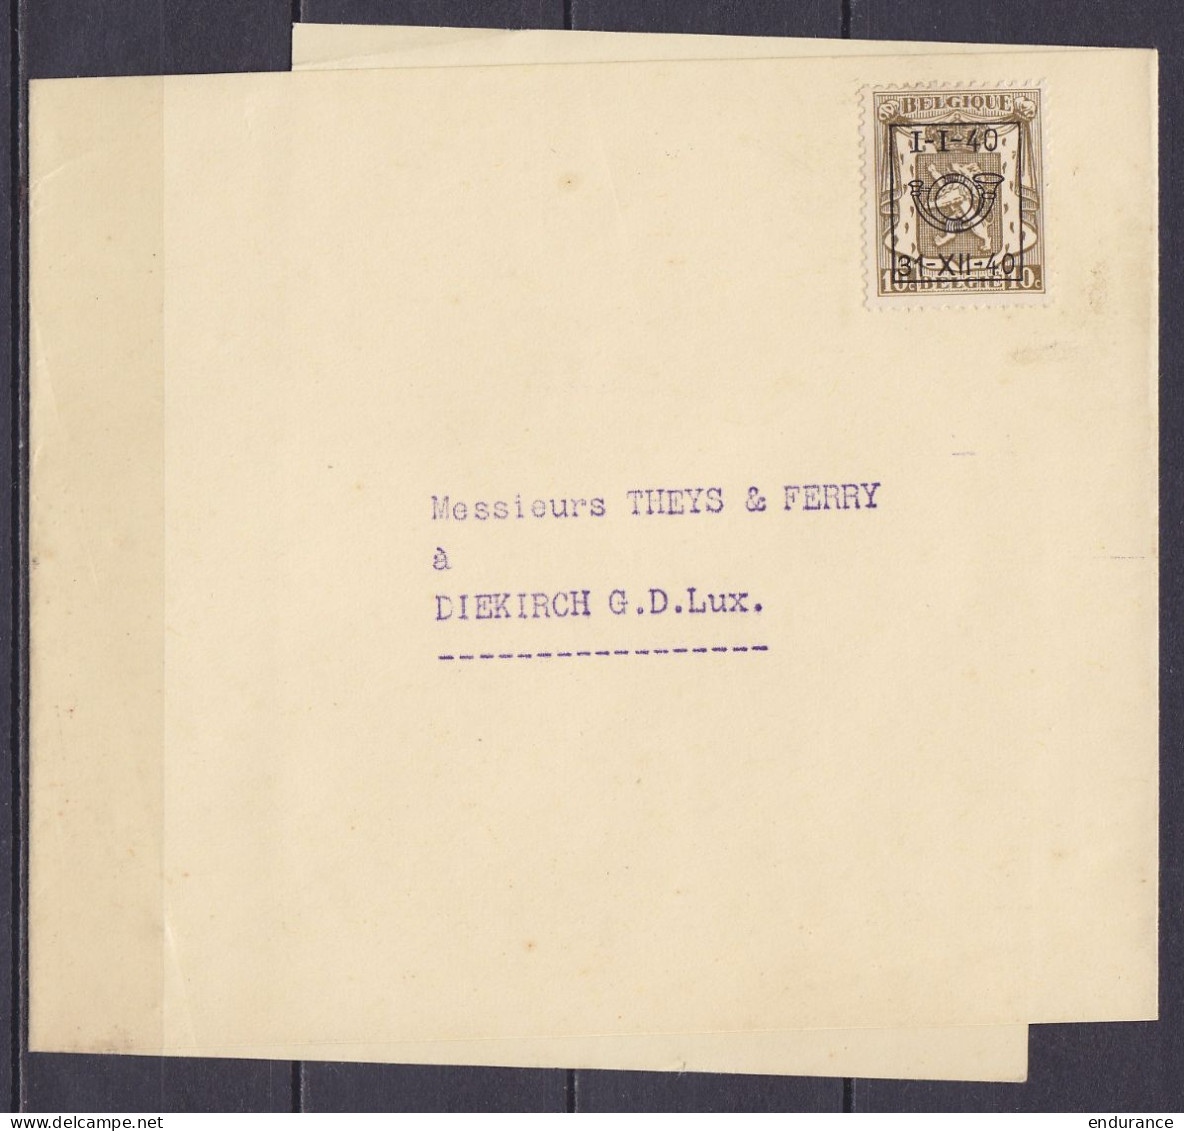 Bande D'impriné Affr. PREO 10c Olive (type N°420) Surch. [I-I-40 / 31-XII-40] Pour DIEKIRCH Luxembourg - Sobreimpresos 1936-51 (Sello Pequeno)